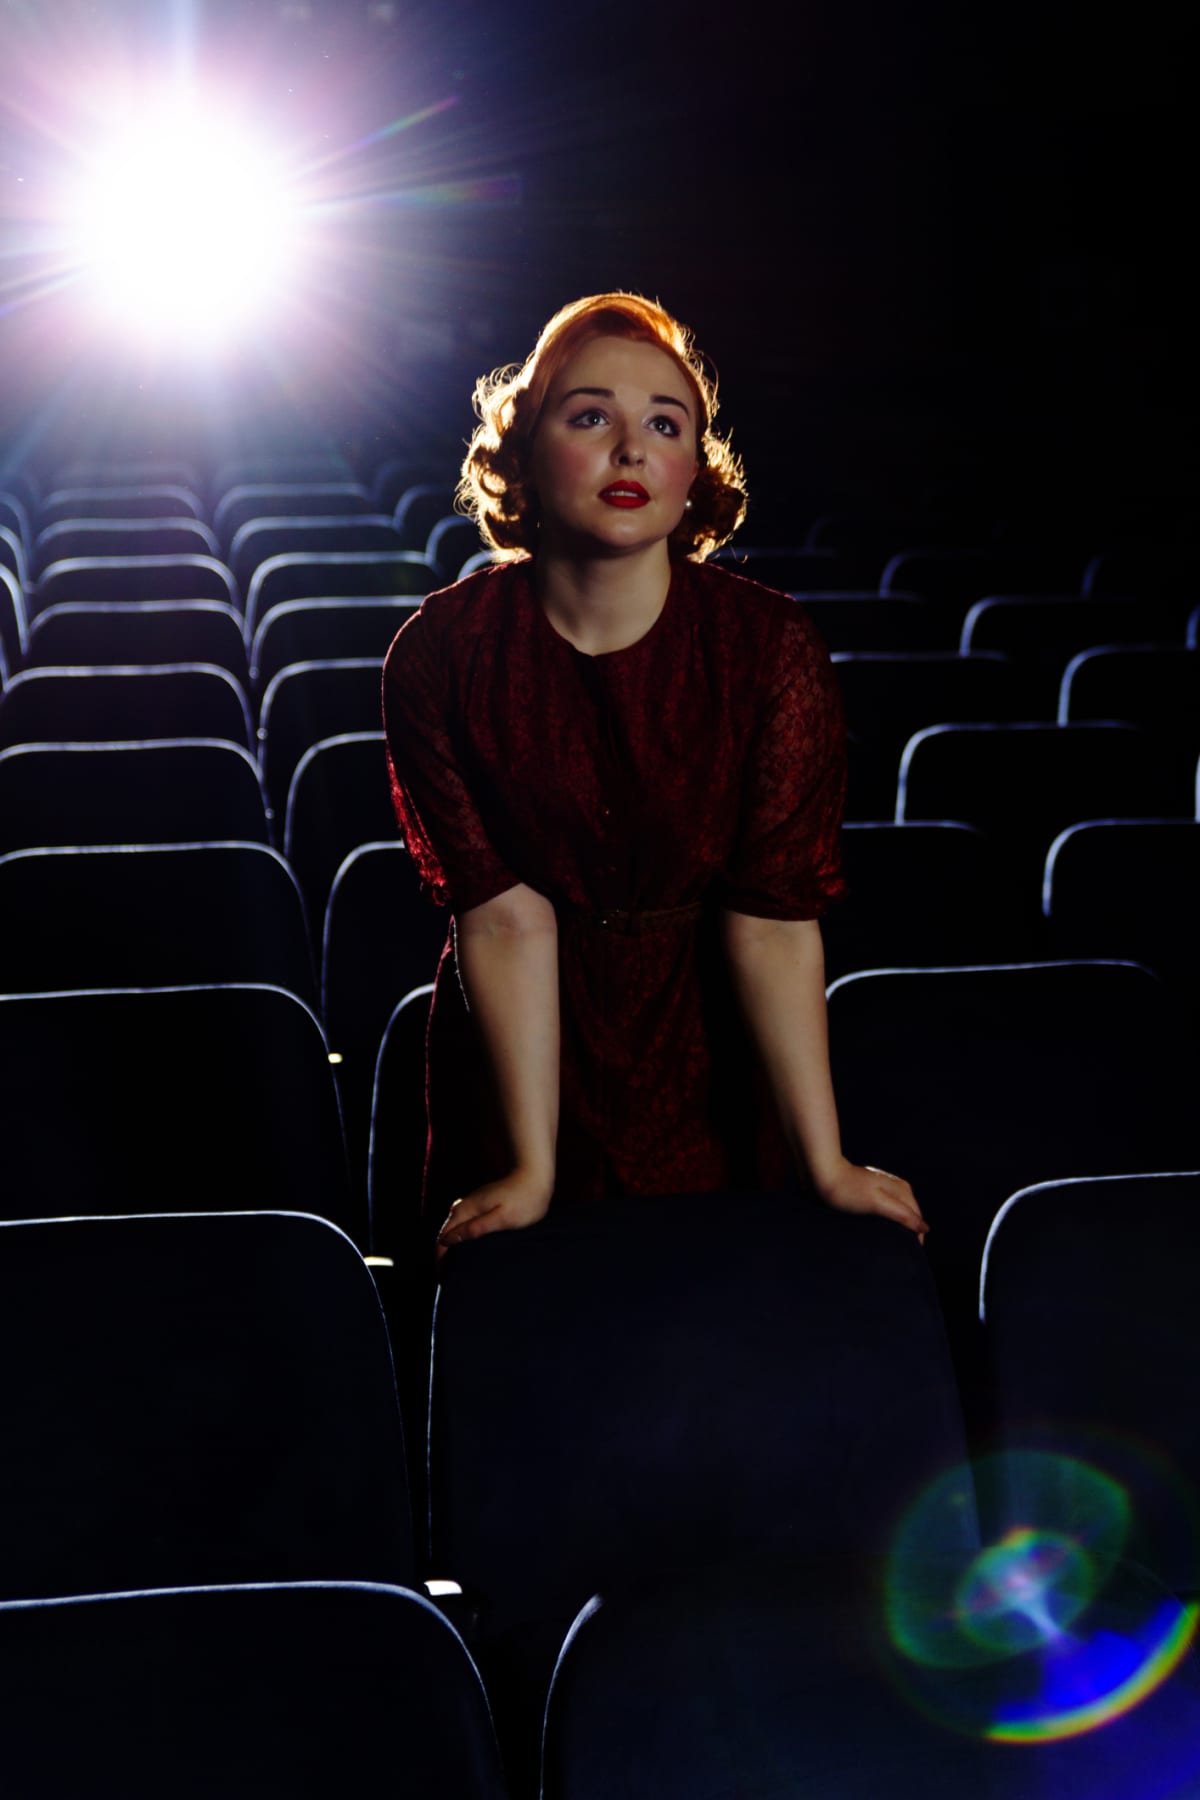 A young woman wearing vintage clothes stands in an empty cinema with the light of the projector behind her.